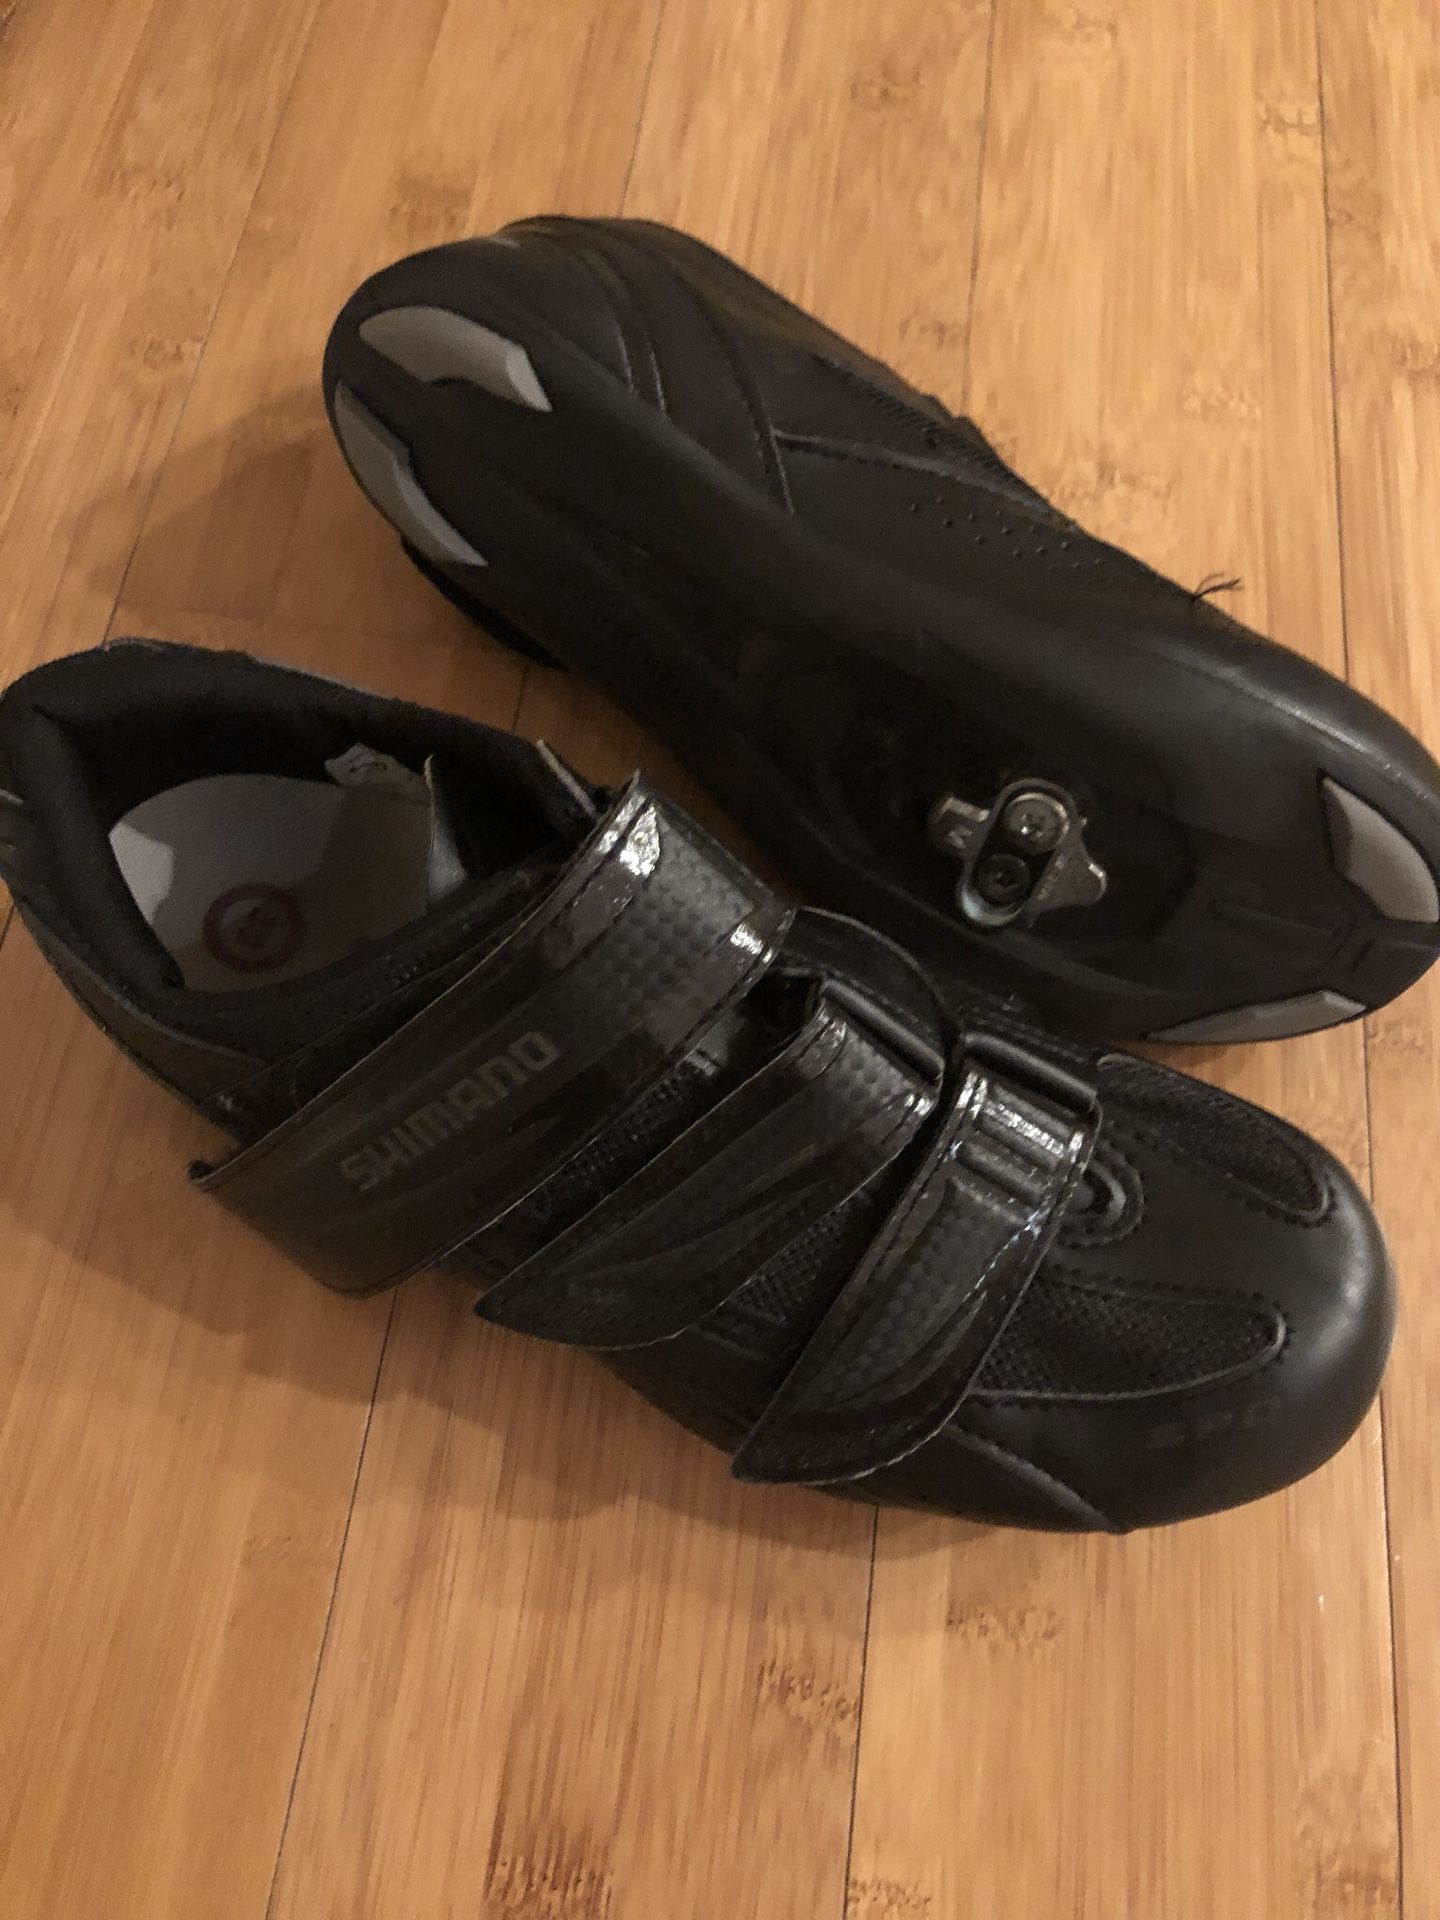 Women’s Shimano indoor cycling shoes with SPD cleats